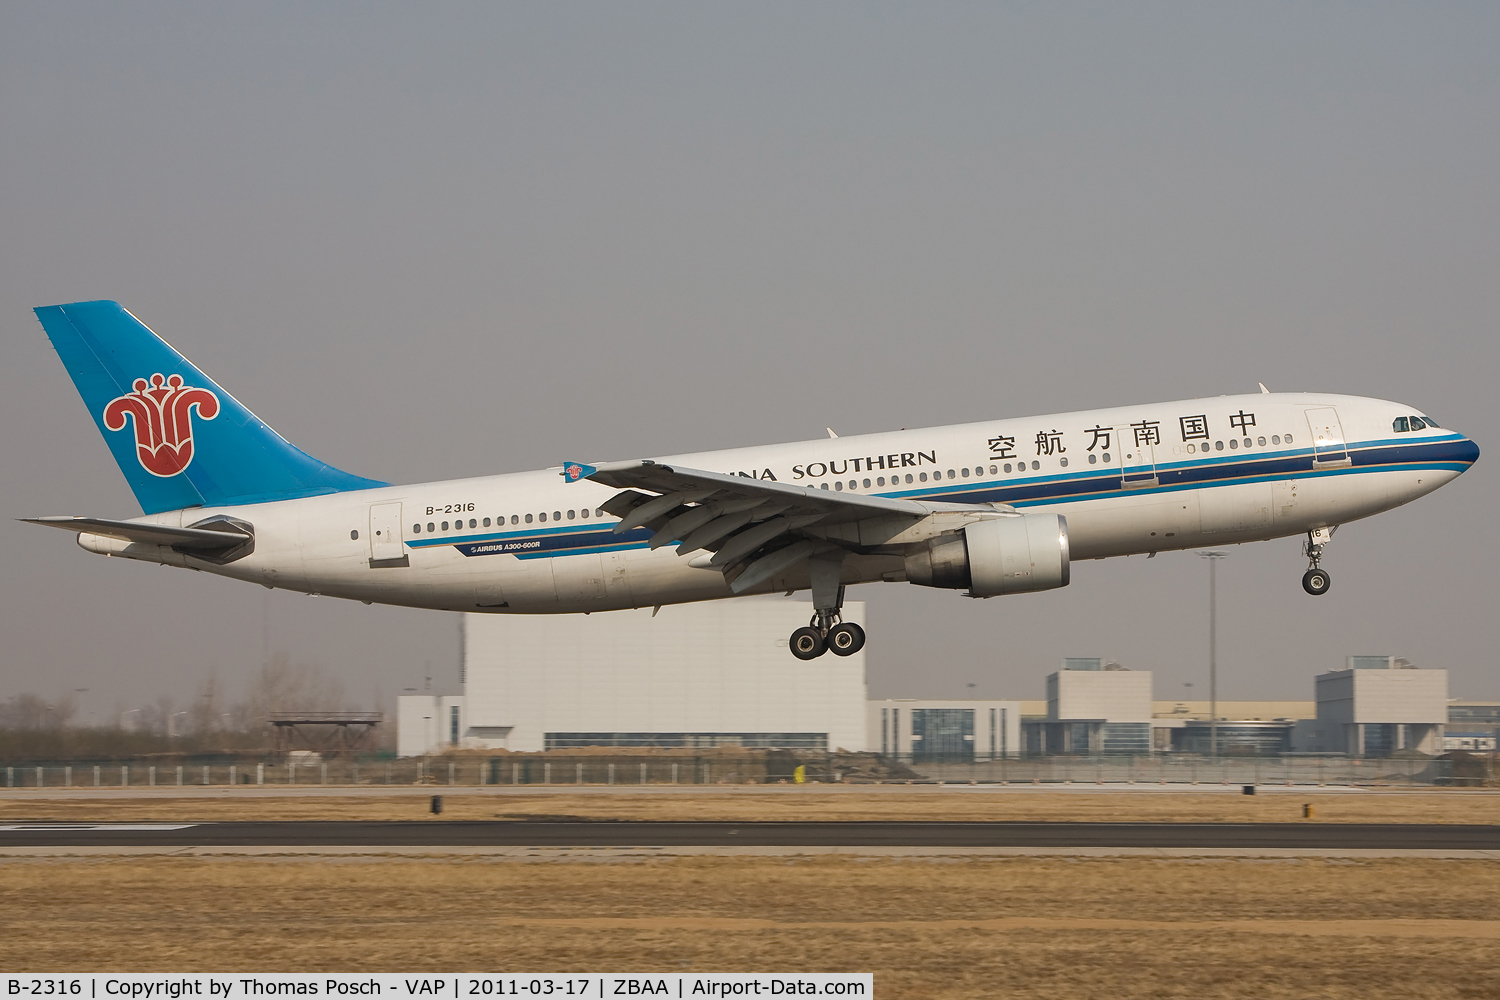 B-2316, 1994 Airbus A300B4-622R C/N 734, China Southern Airlines